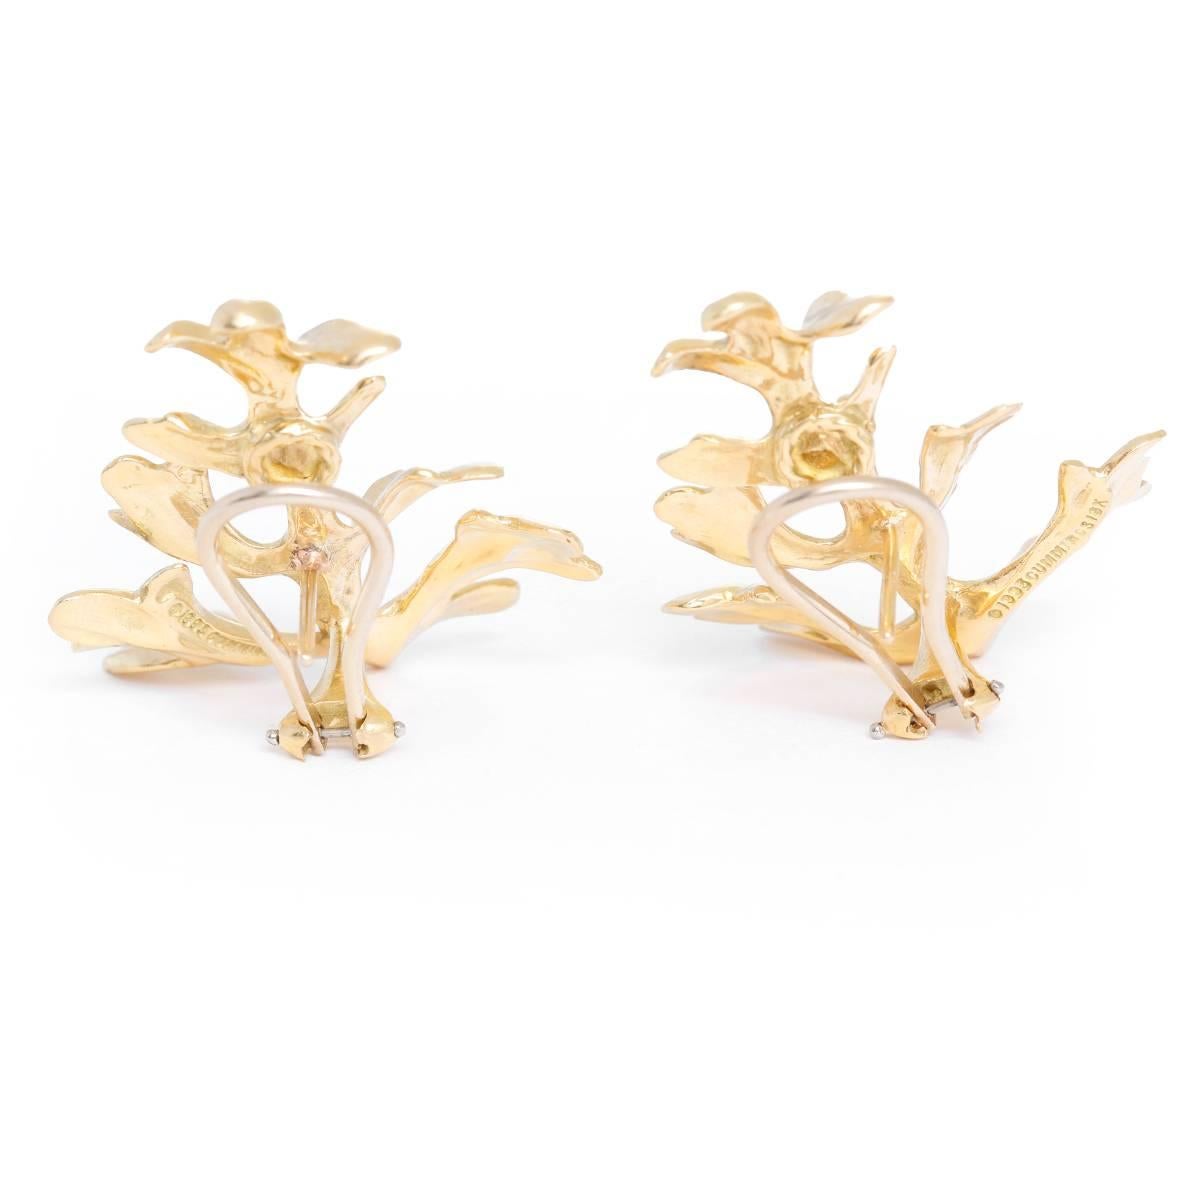 This Angela Cummings earrings feature a leaf design set in 18k yellow gold completed by posts and omega backs. Earrings measure apx. 1-5/16 inches x 1-1/8 inches. Total weight is 17.00 grams. Signed, 1993 Cummings 18k.